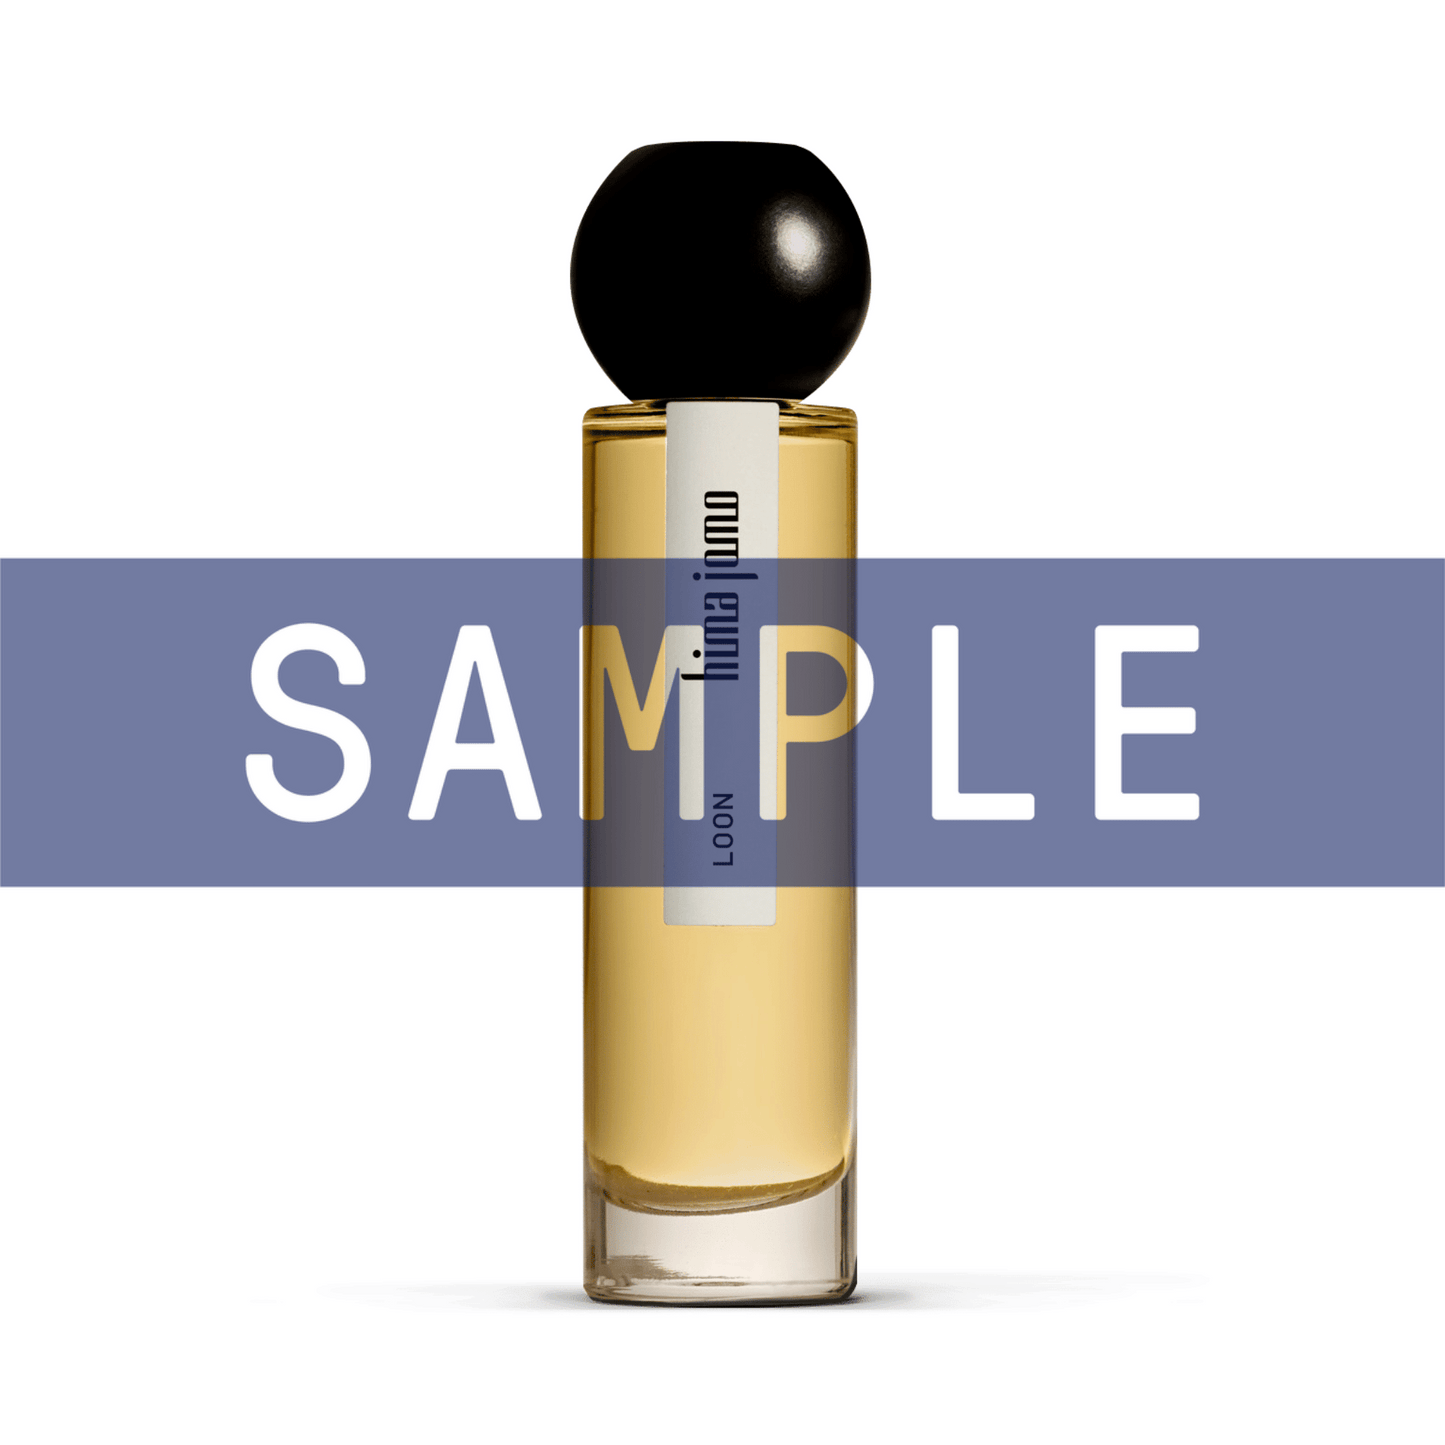 Primary Image of Sample - Loon EDP